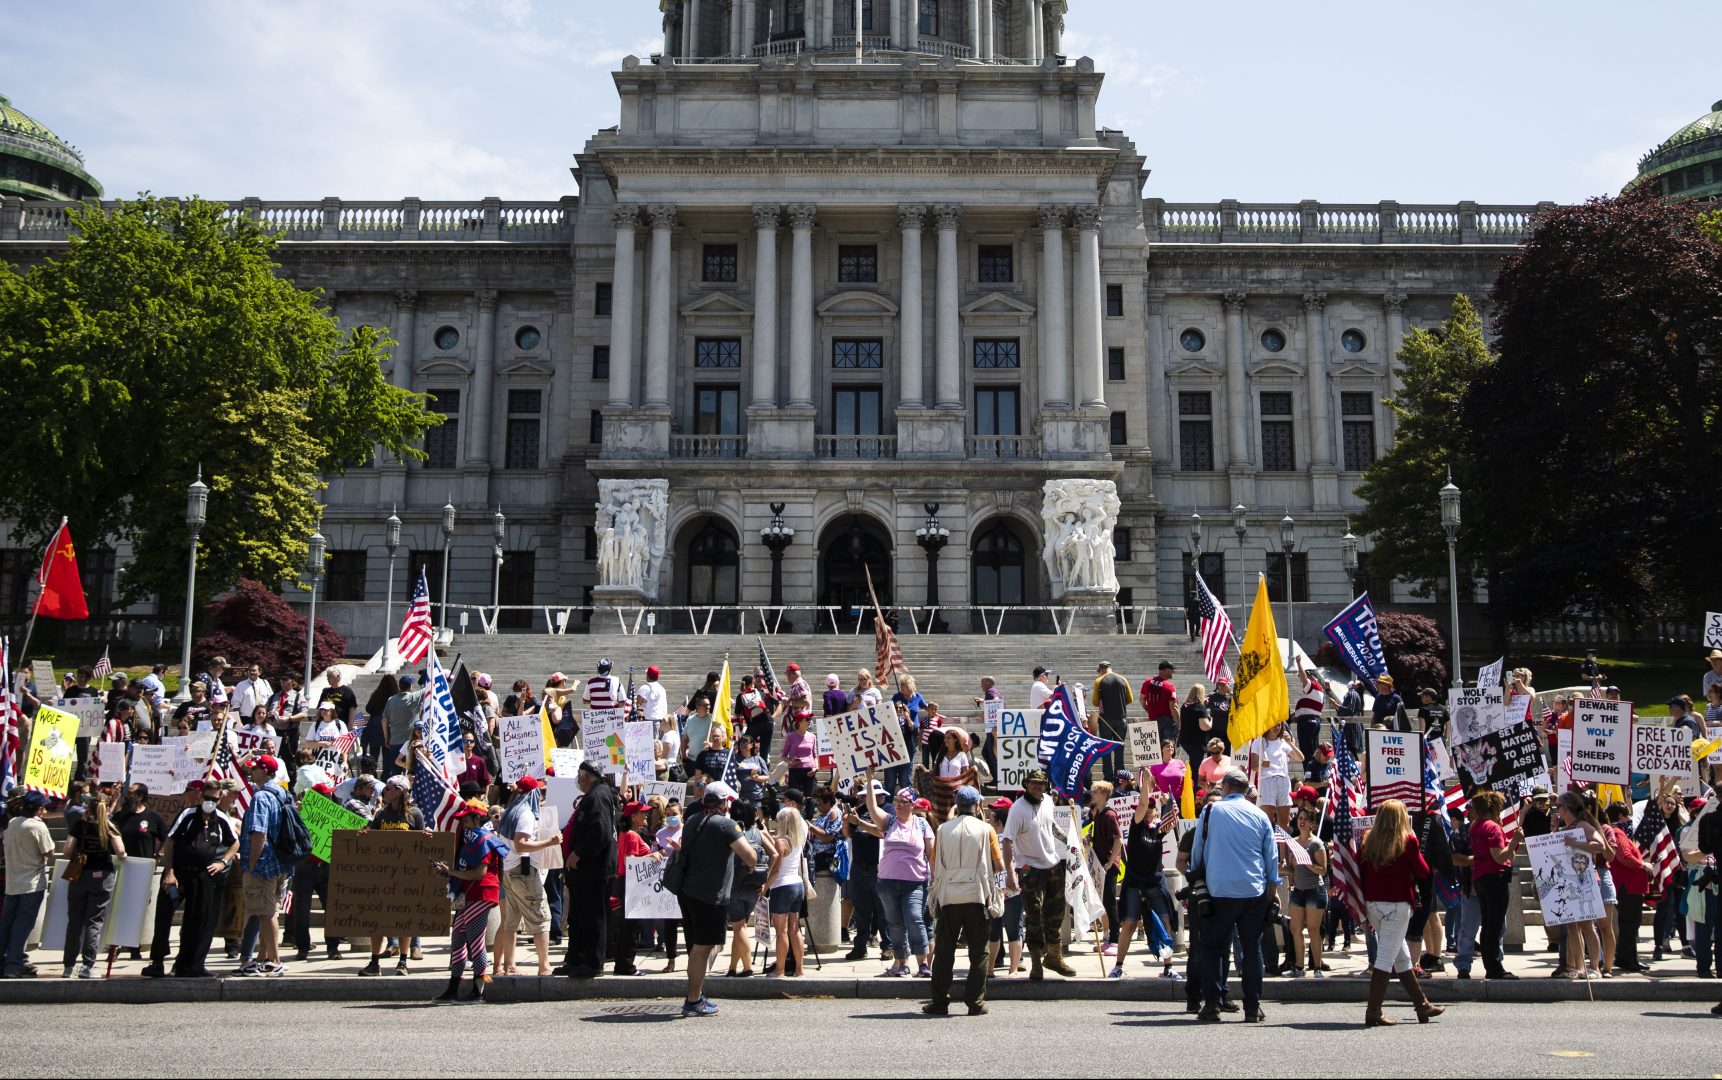 Protesters demonstrate during a rally against Pennsylvania's coronavirus stay-at-home order at the state Capitol in Harrisburg, Pa., Friday, May 15, 2020.